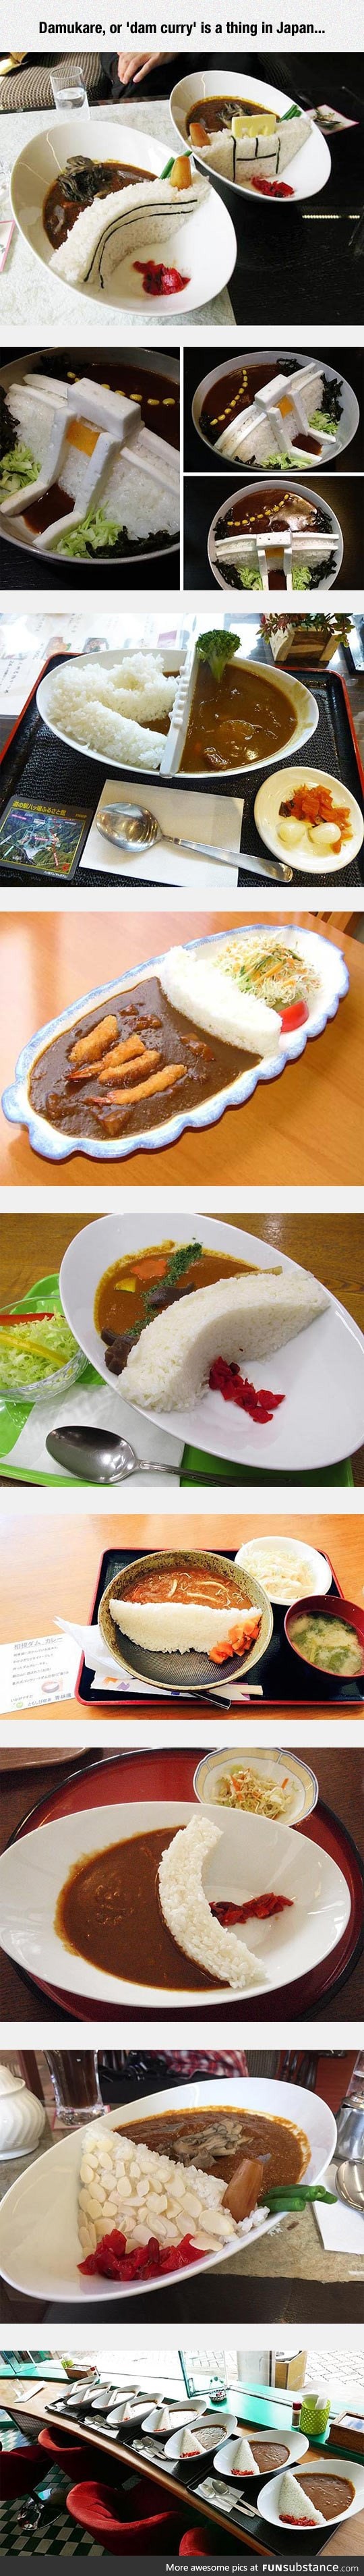 In Japan they build dams for their curry